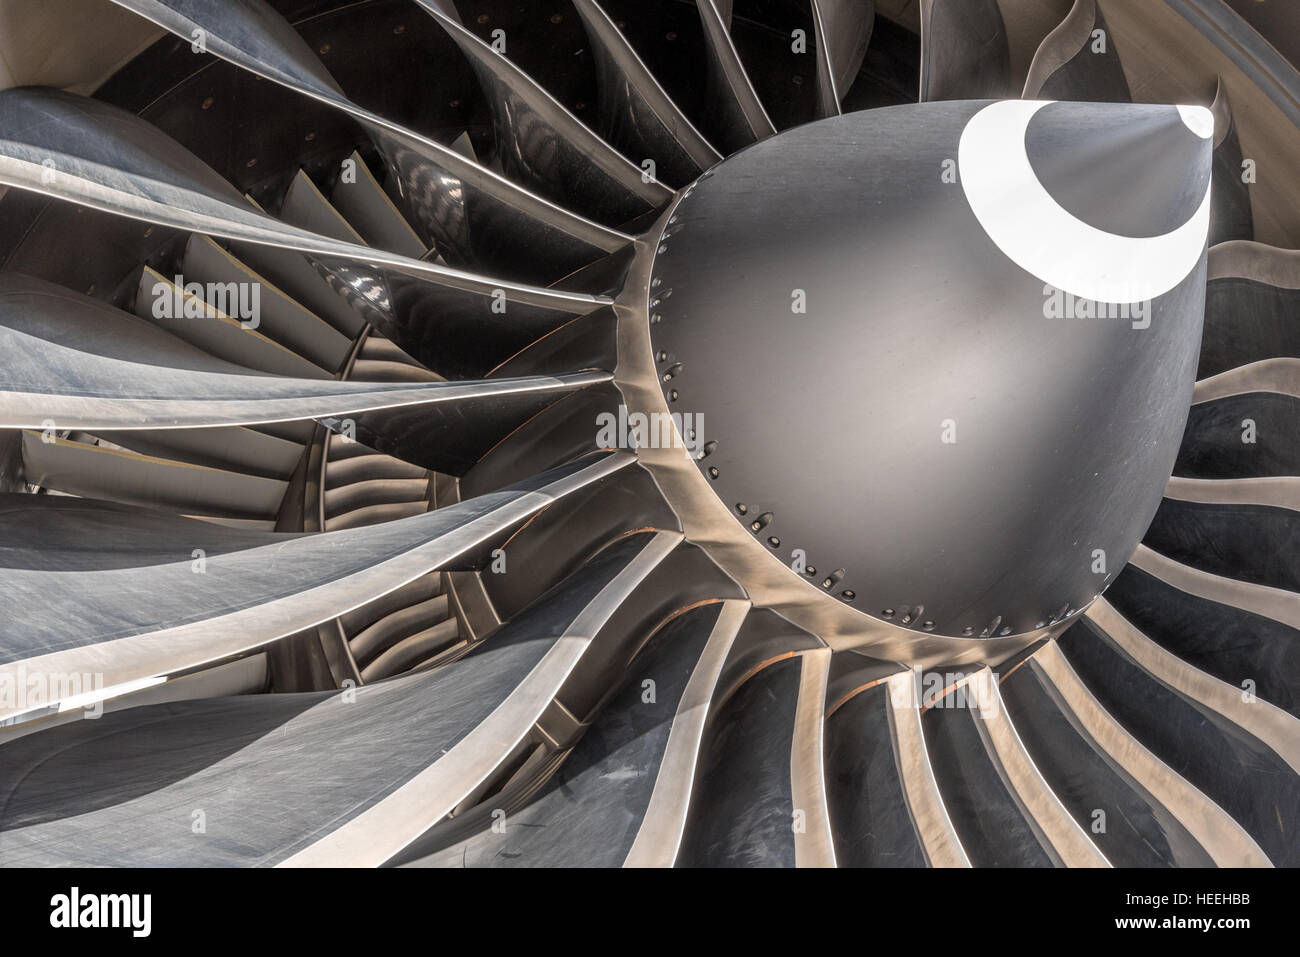 N1 fan blades on a large General Electric GE90 high bypass ratio turbine  engine powering large modern airliners Stock Photo - Alamy